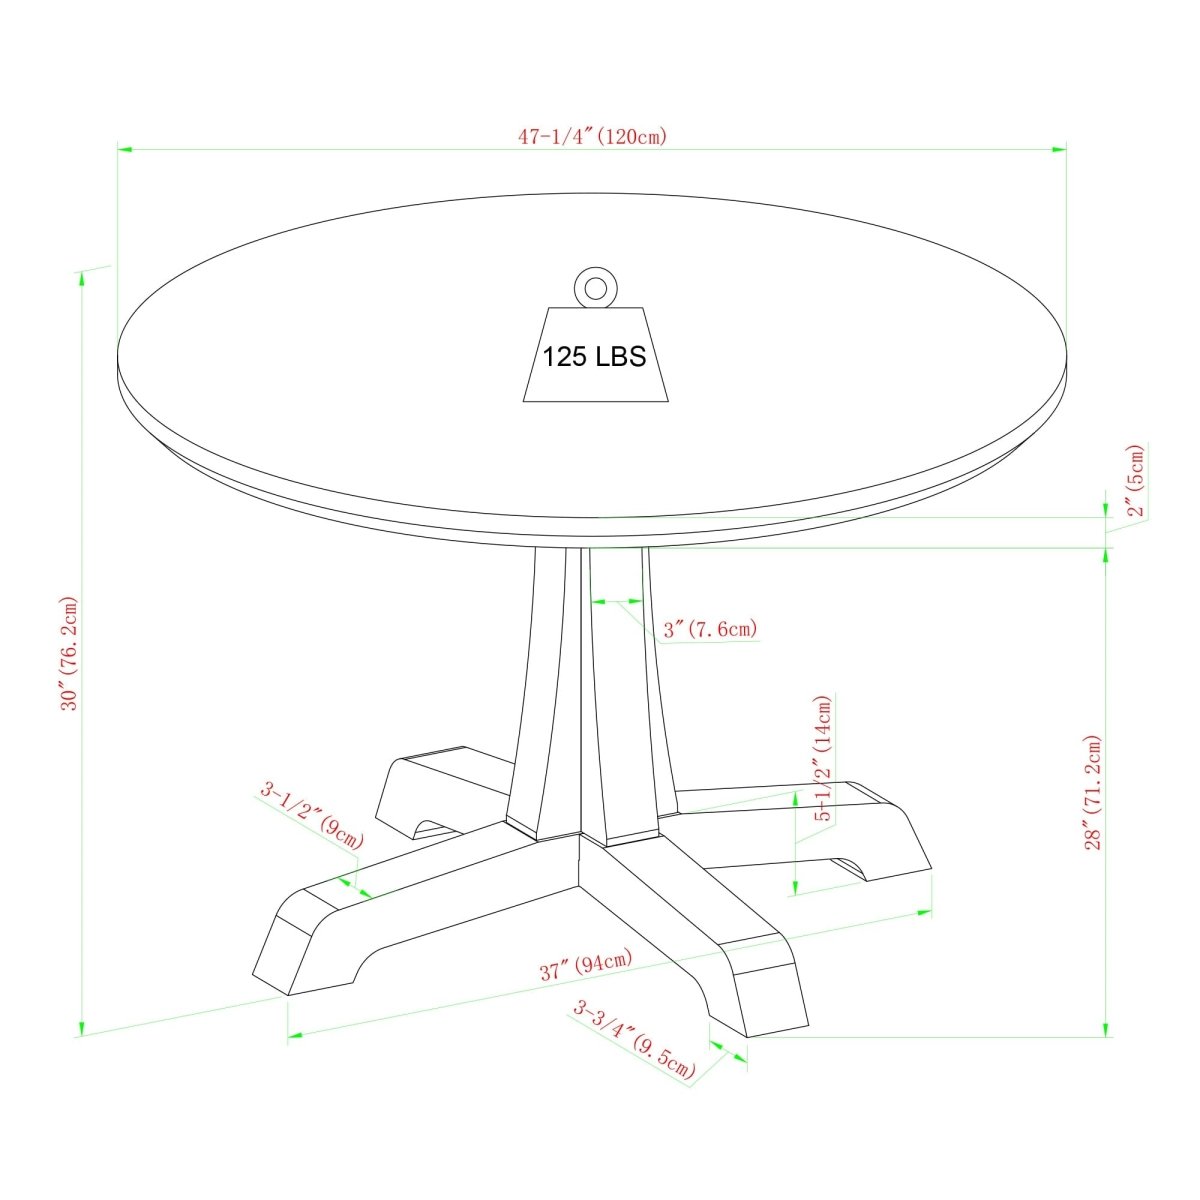 Walker Edison 48" Round Dining Table with Pedestal Base - lily & onyx